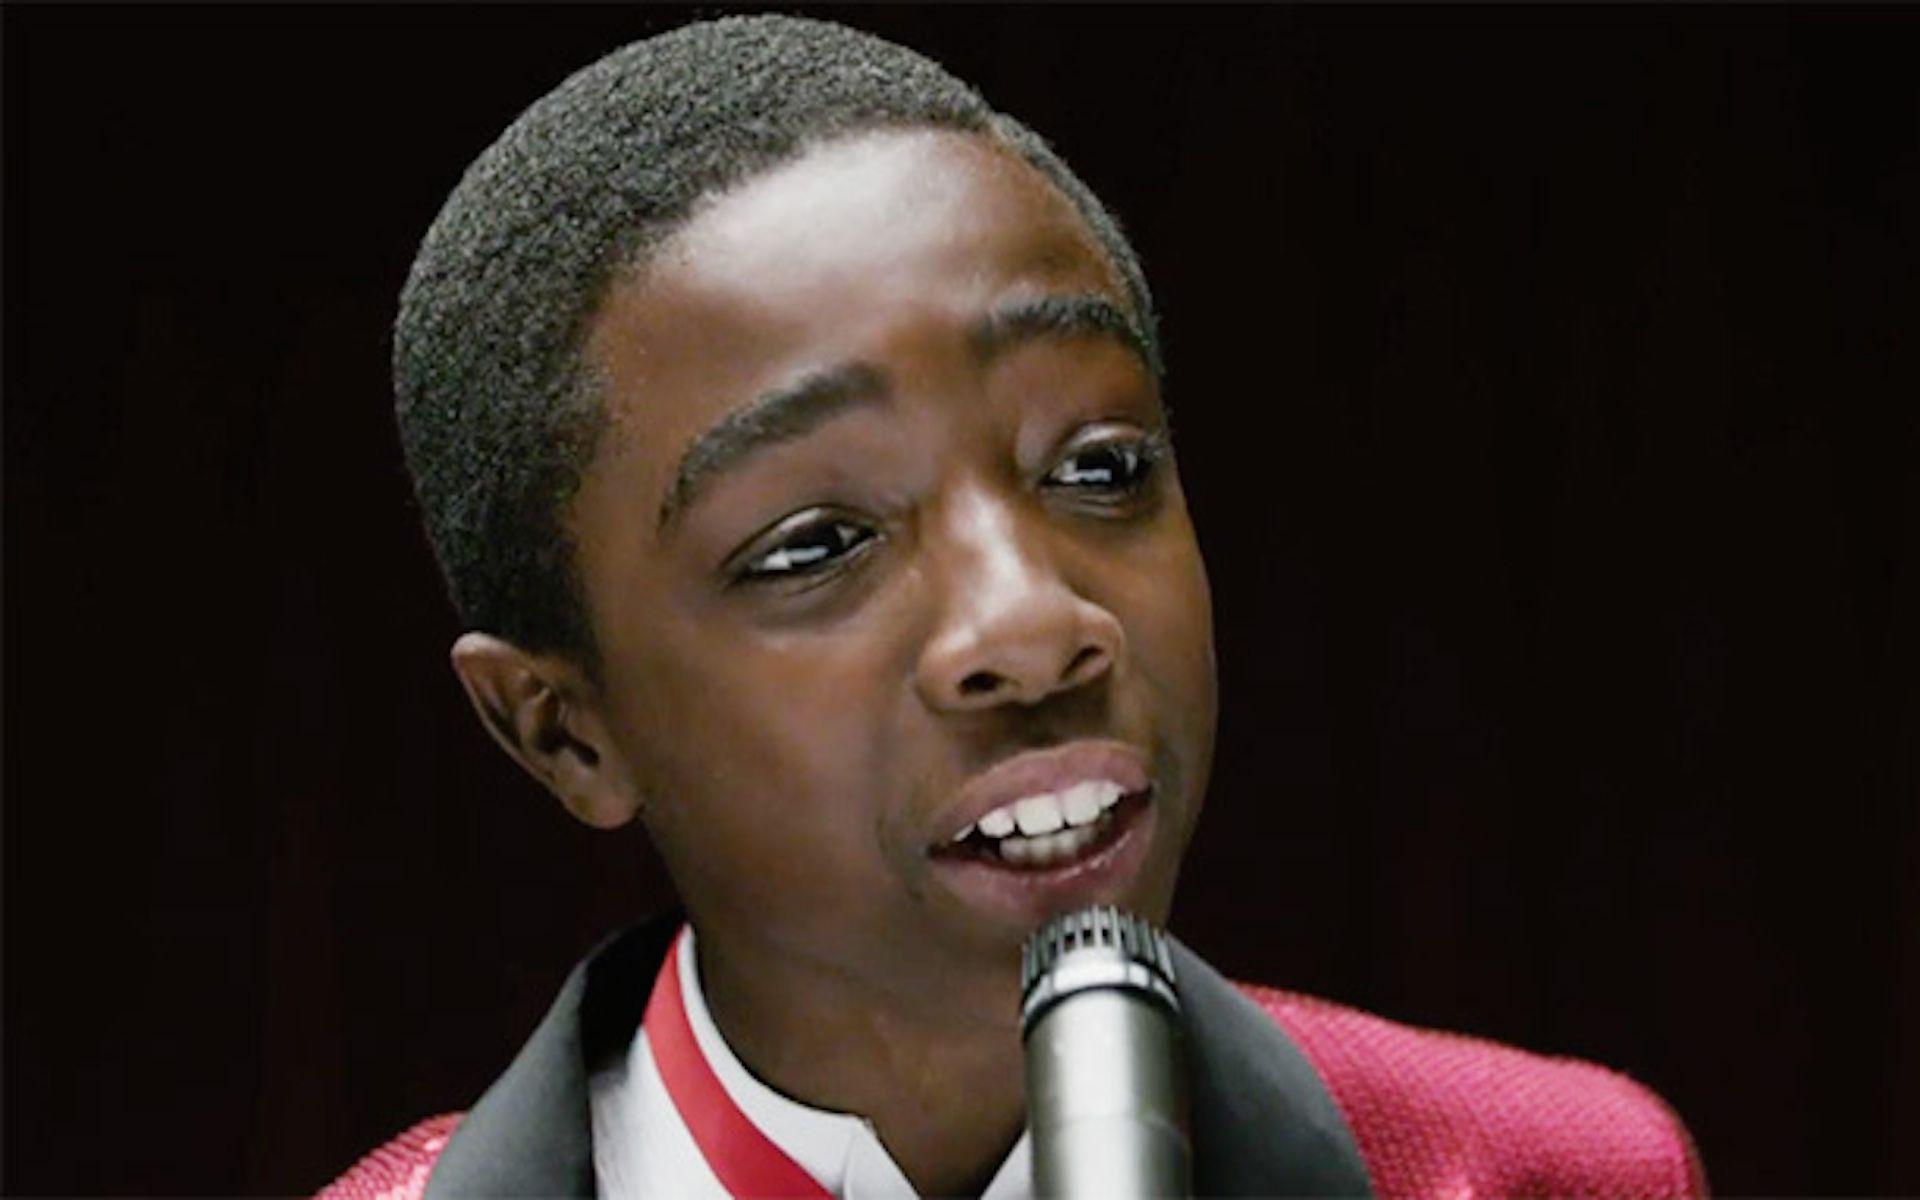 Watch Stranger Things' Caleb McLaughlin play a young Ricky Bell